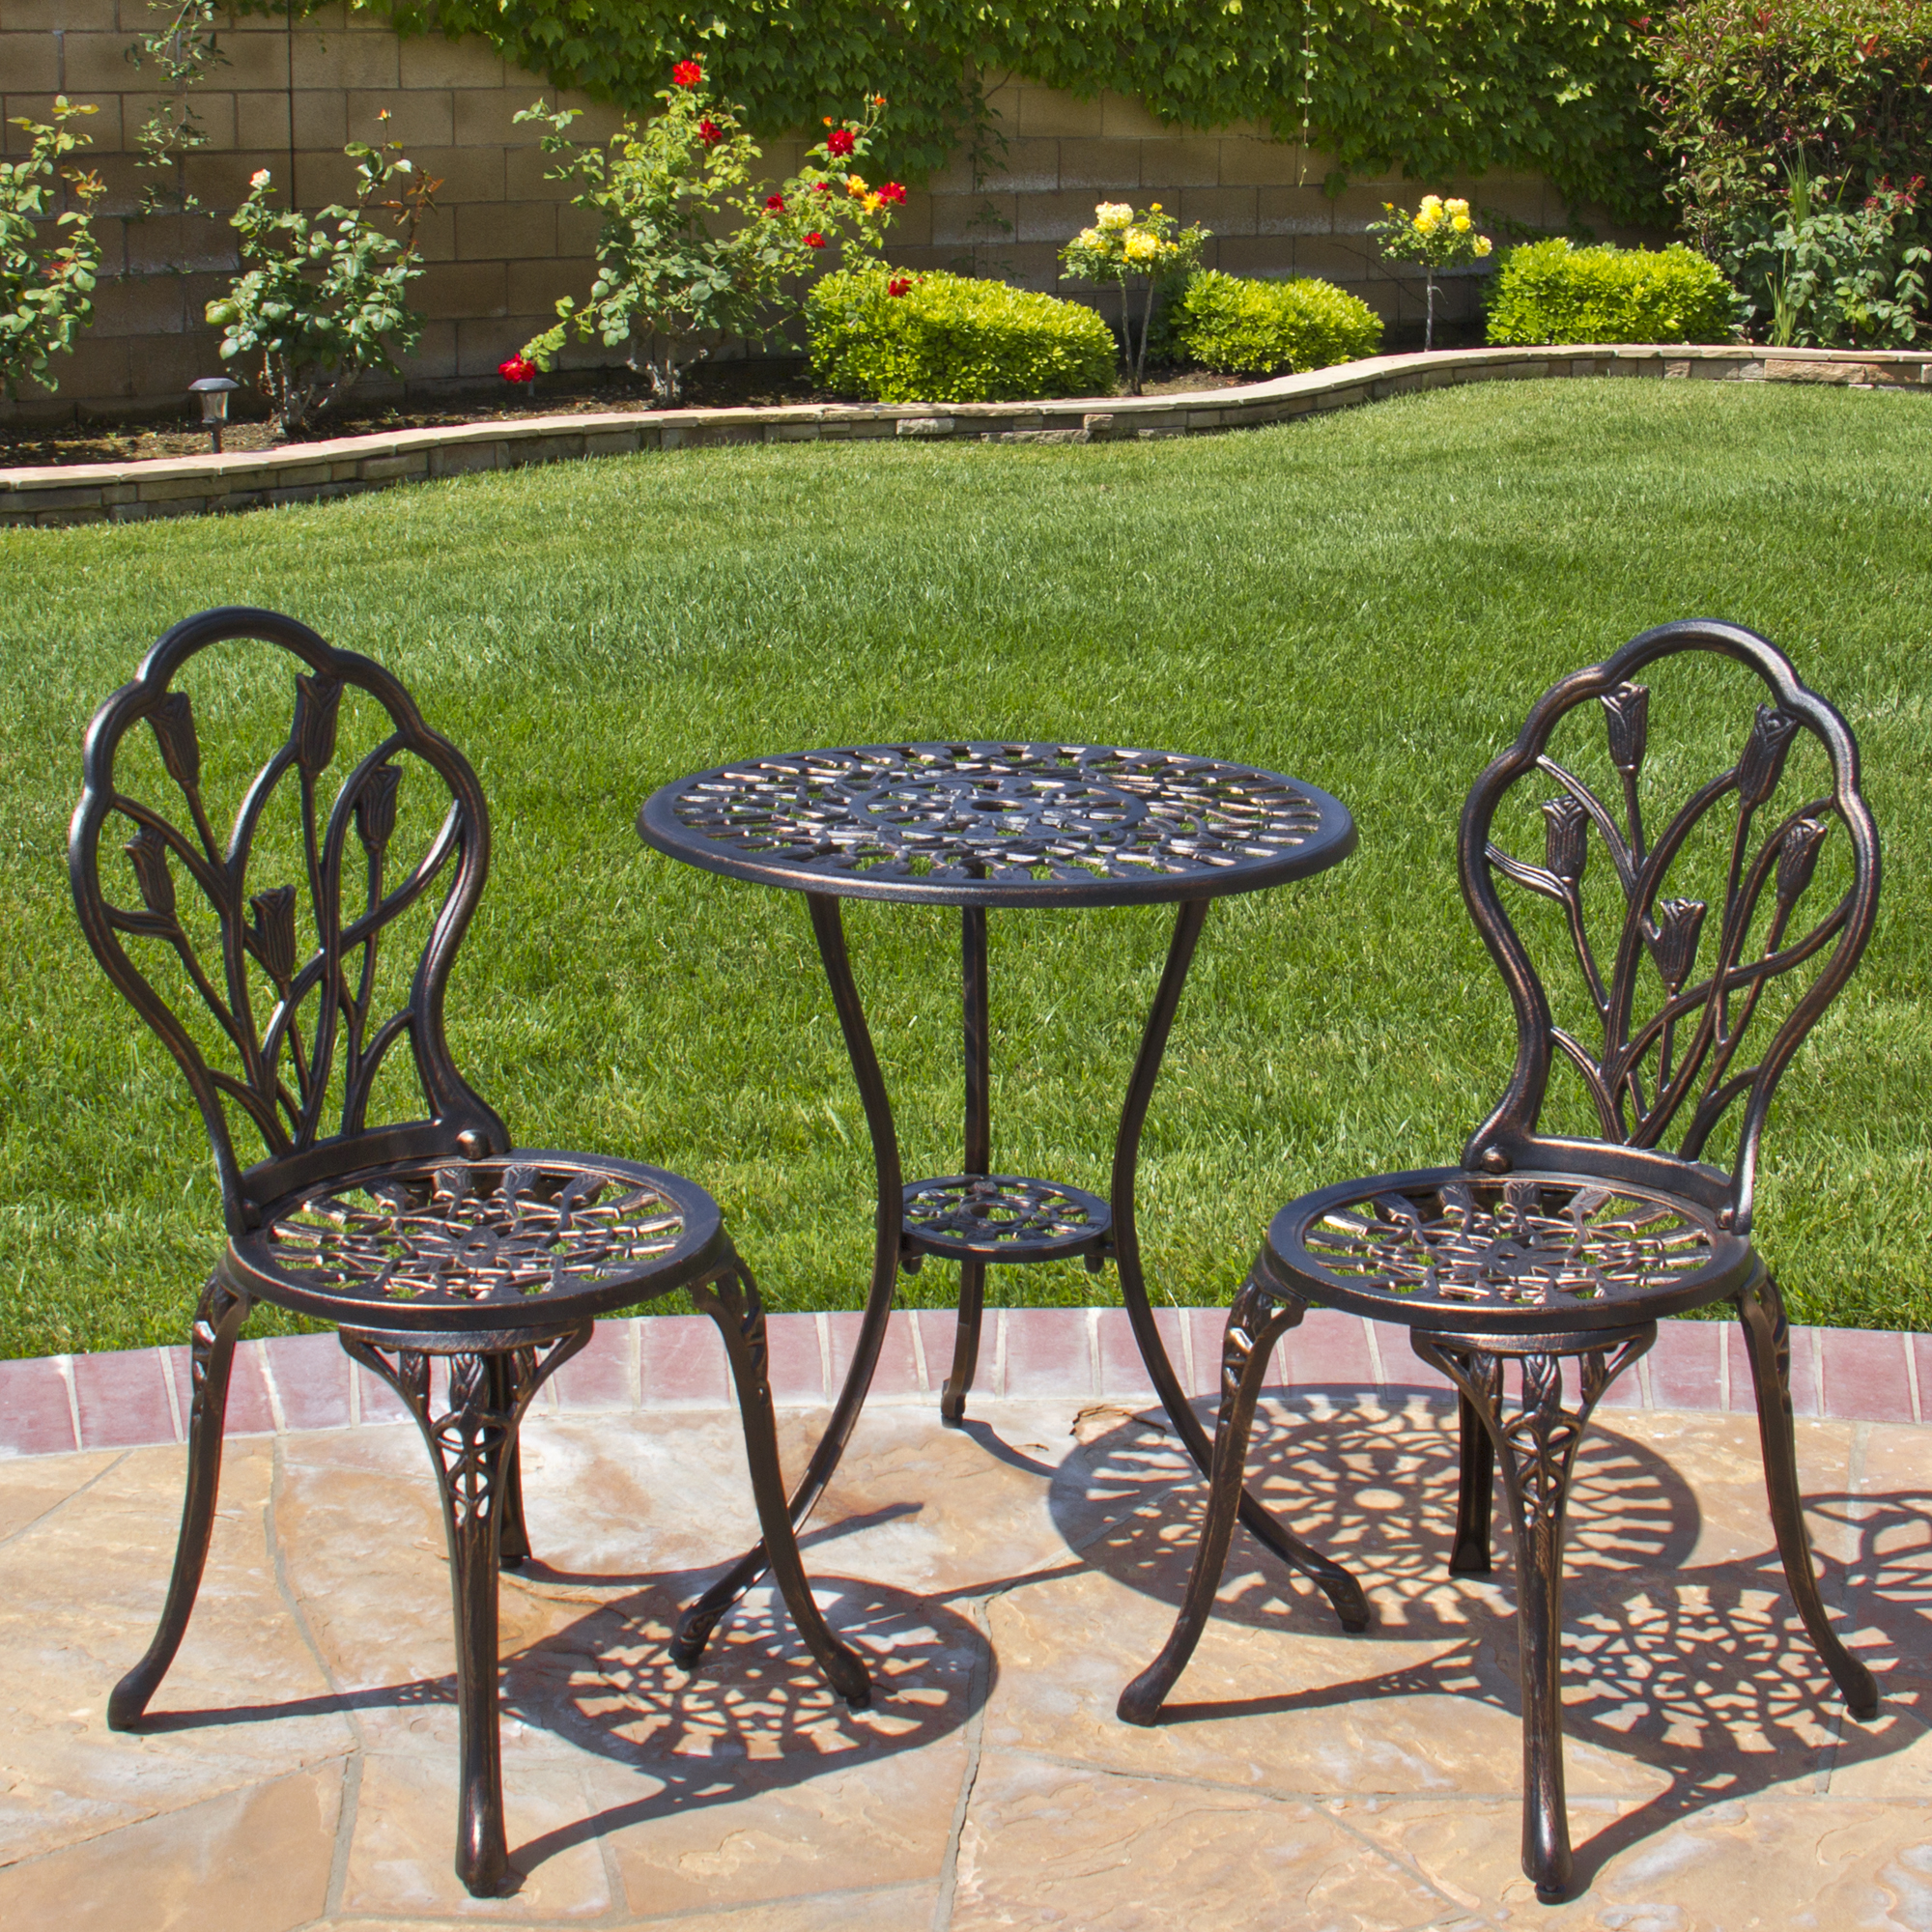 Get the Luxury of Bistro Patio Set for your home